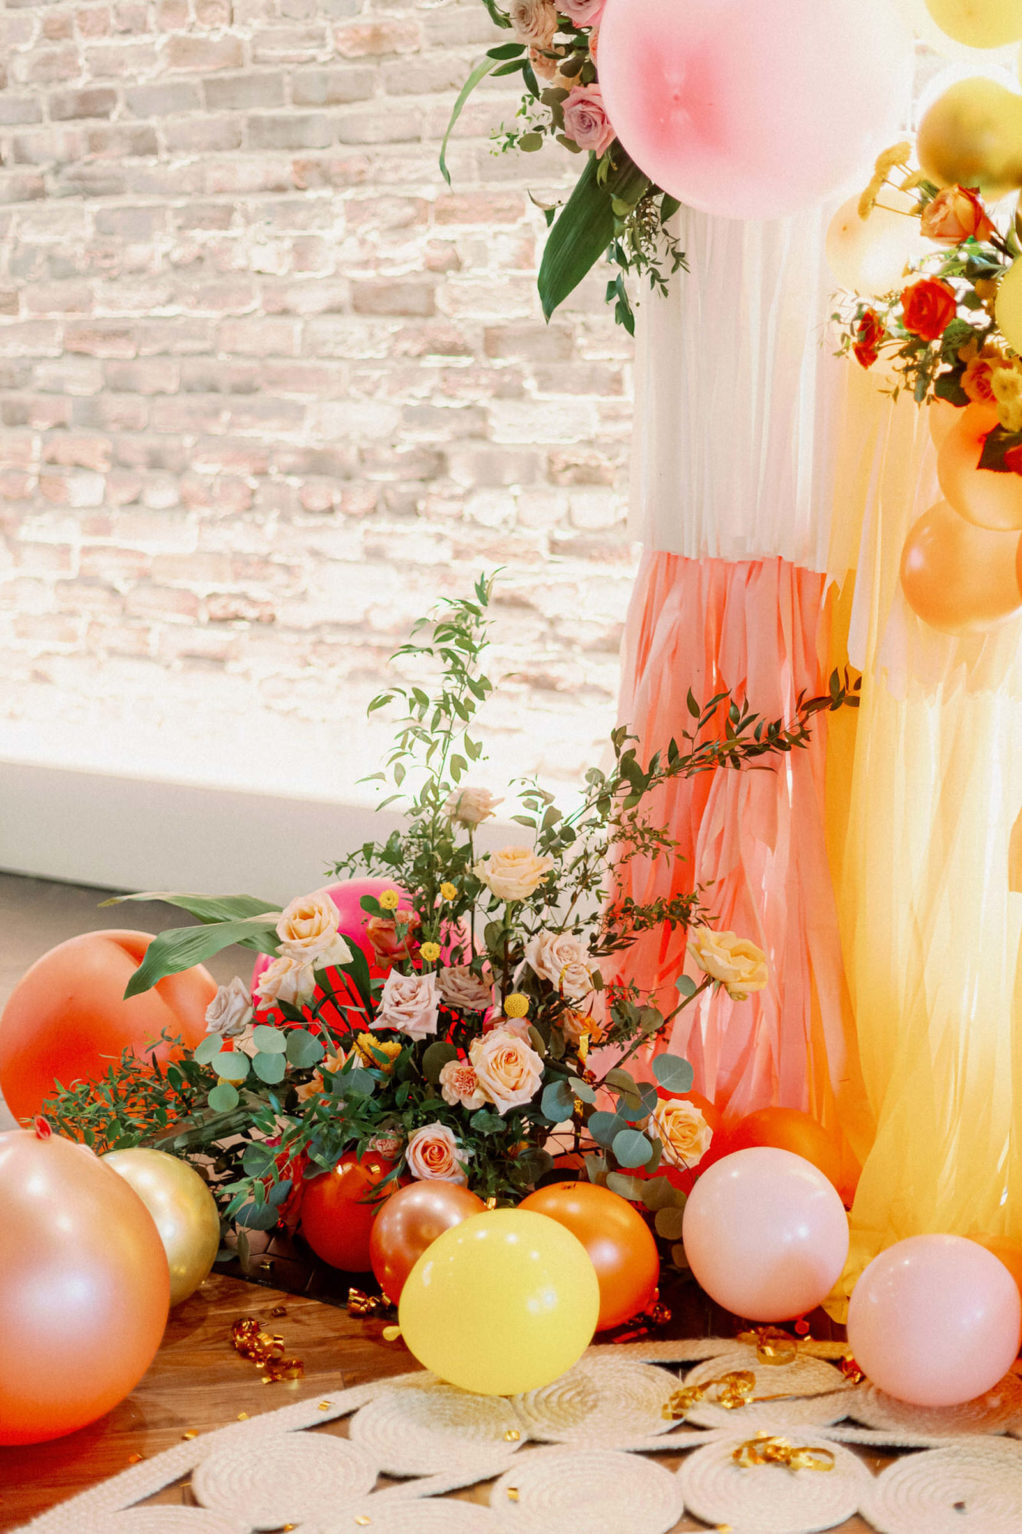 Whimsical and Colorful Wedding Decor, Pink, Orange, Yellow and White Fringe and Balloon Ceremony Backdrop | Tampa Bay Wedding Photographer Dewitt for Love